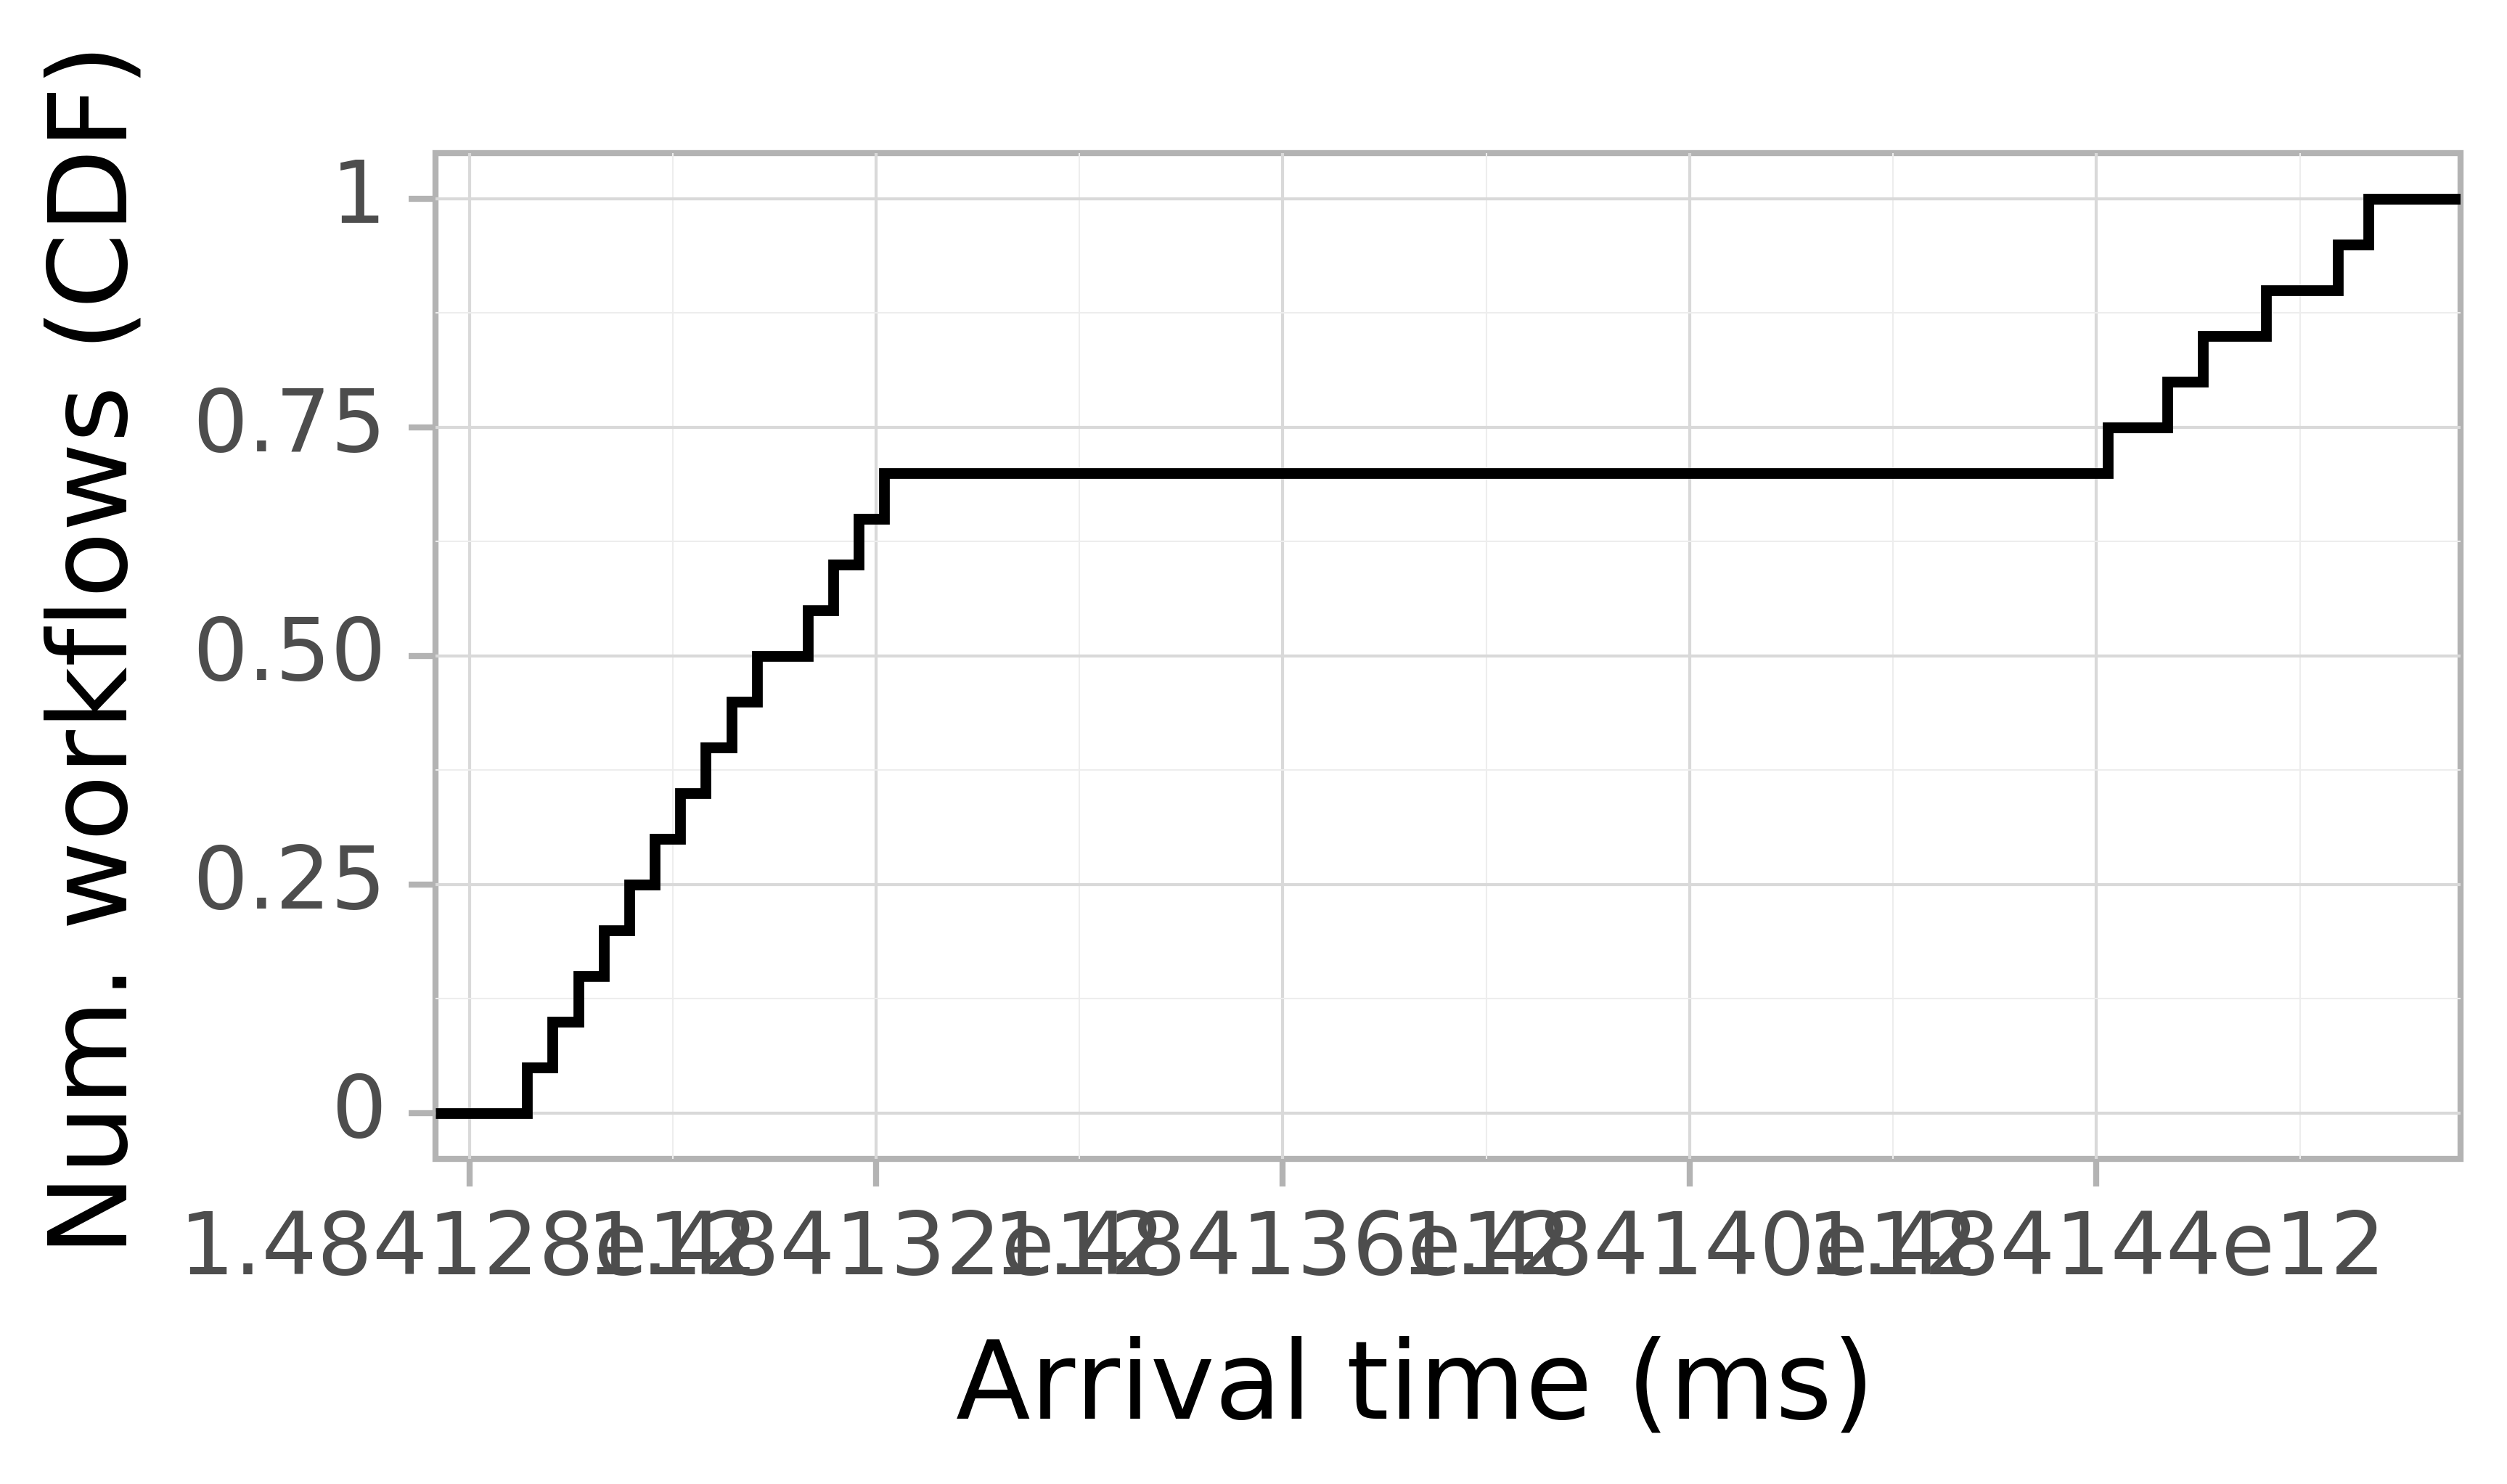 Job arrival CDF graph for the askalon-new_ee21 trace.